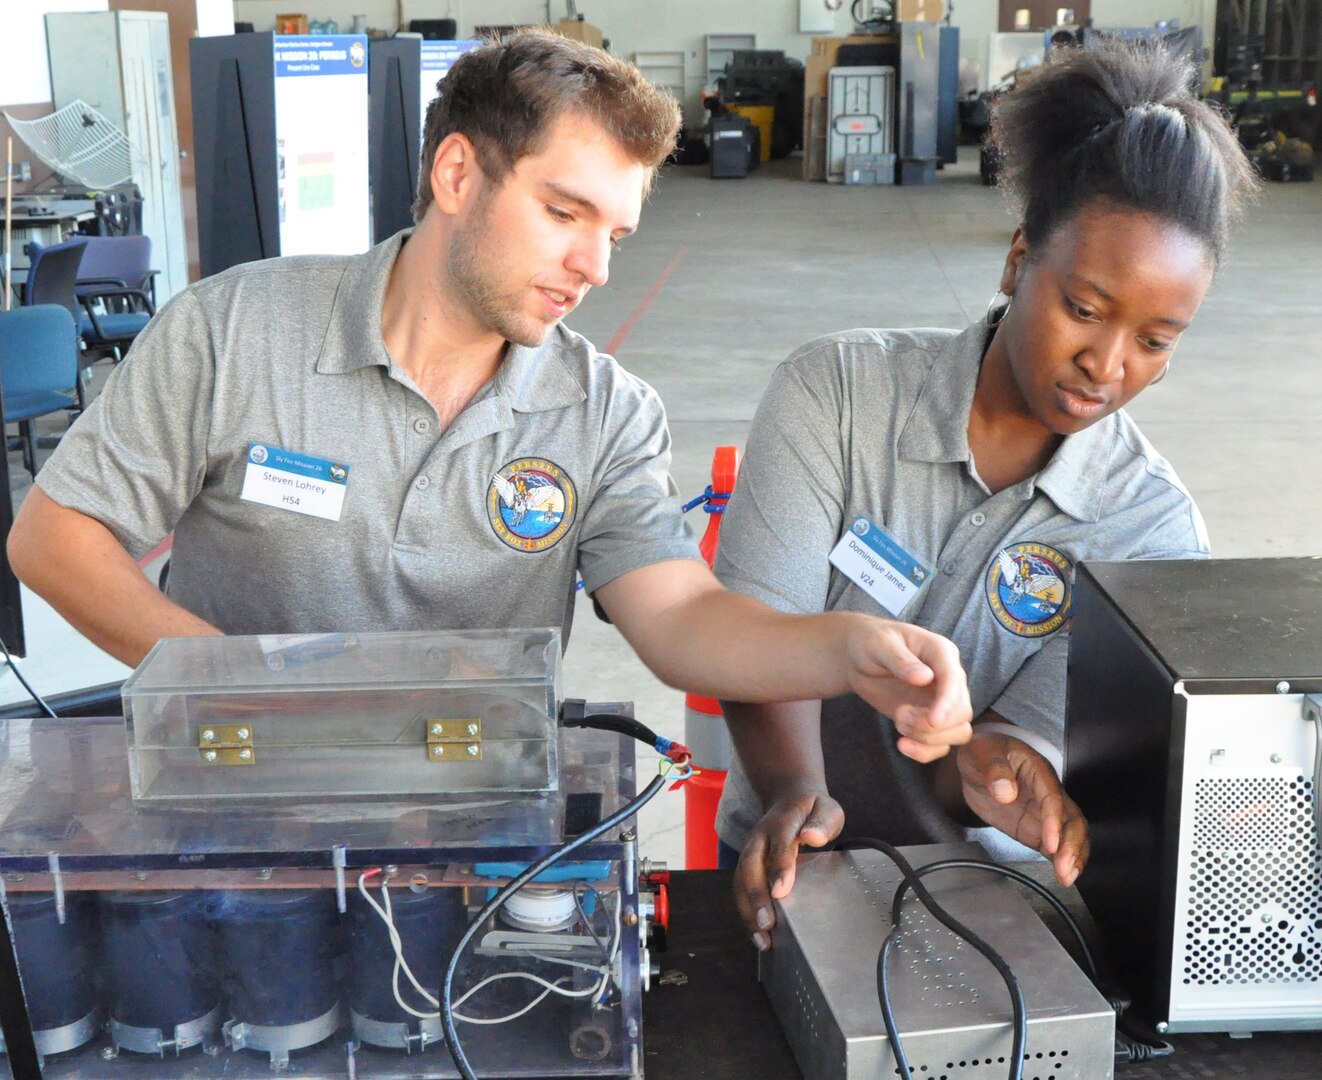 IMAGE: DAHLGREN, Va. (Sept. 19, 2019) – Steven Lohrey, left, and Dominique James prepare to demonstrate PERSEUS – the most recent effort in a line of projects solving the integration of high-powered electric weapon systems and electric propulsion systems aboard U.S. Navy ships. They were among a seven-member team of Sly Fox Mission 26 junior scientists and engineers who briefed military, government civilians, and defense contractors five times over the course of two days on their development of PERSEUS.  (U.S. Navy photo/Released)